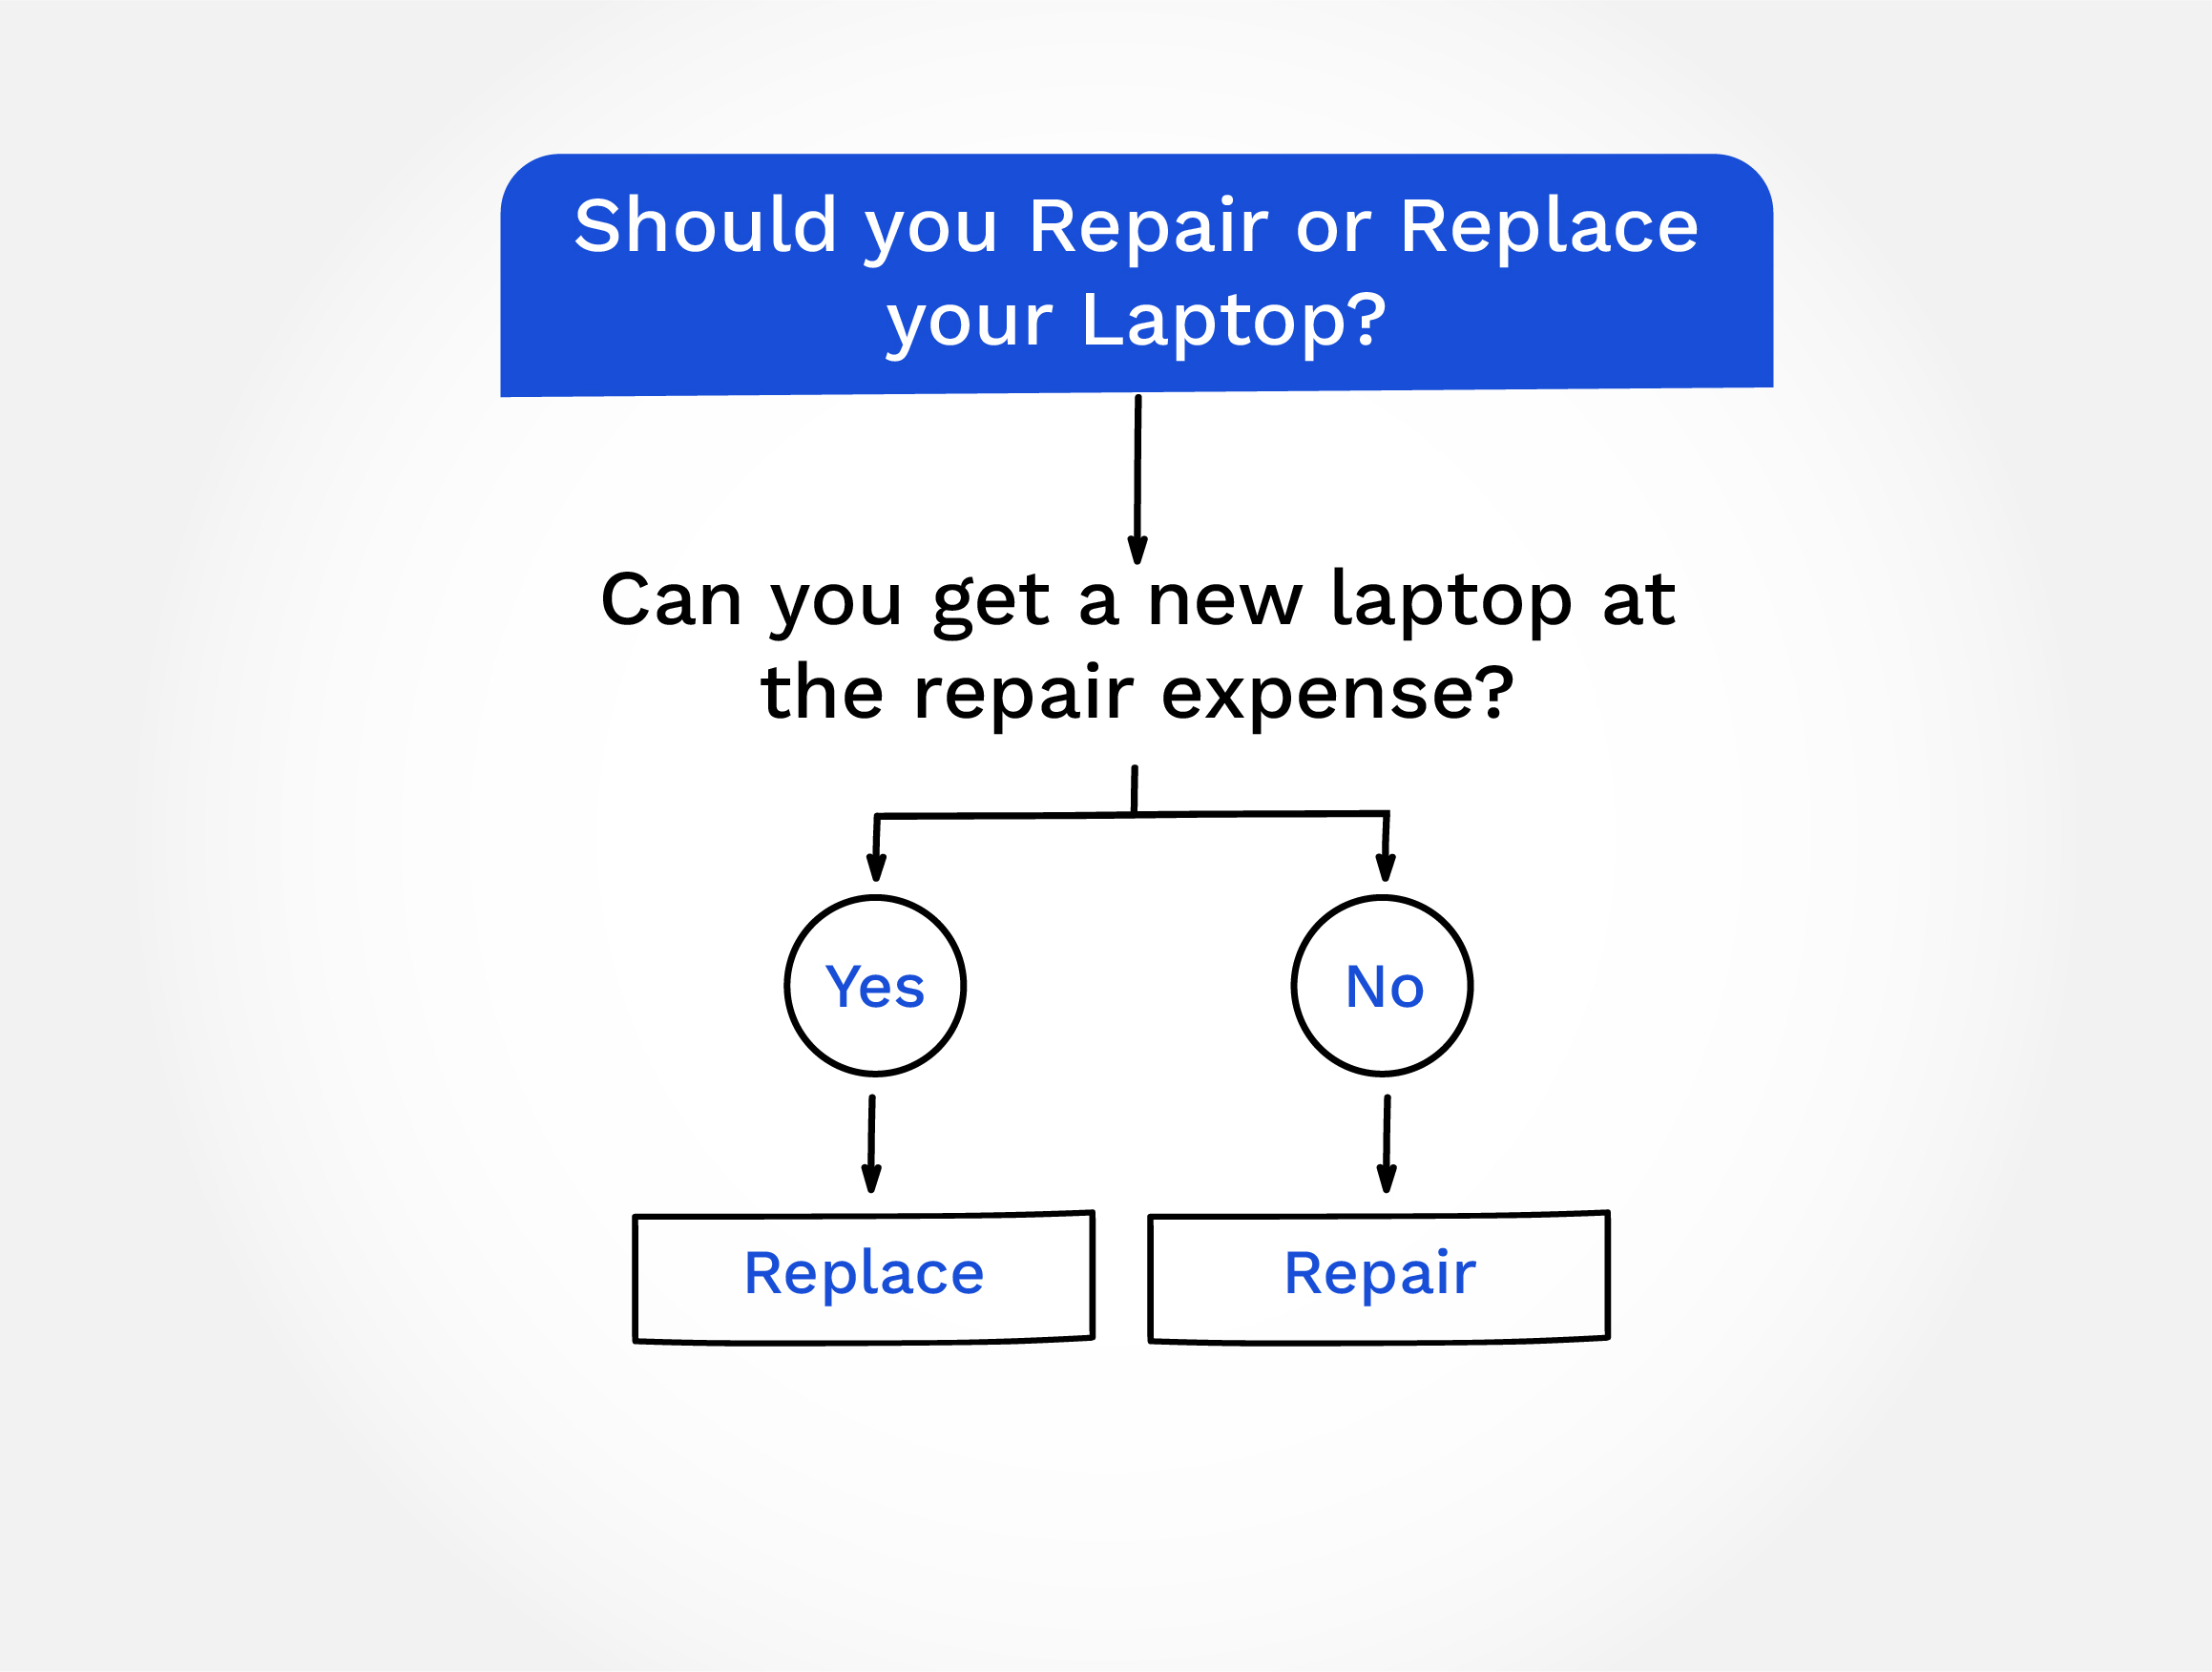 Can You Get a New Laptop at The Repair Expense